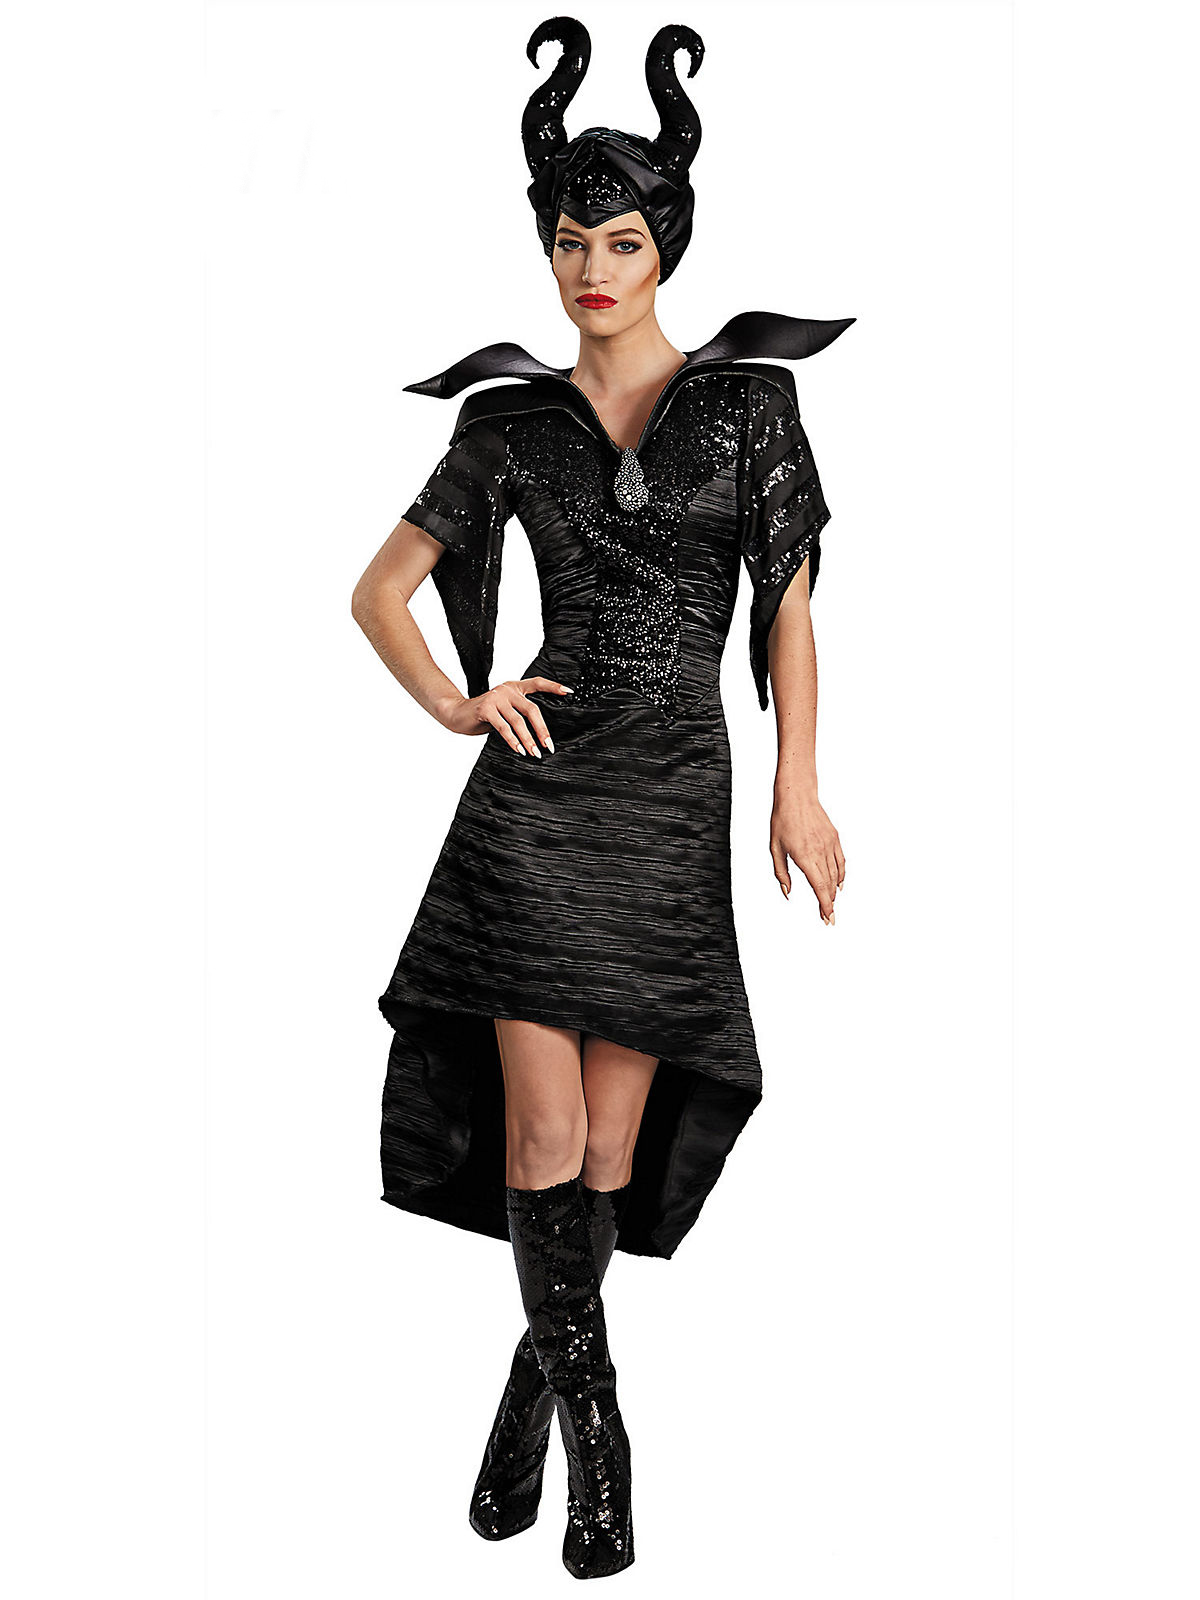 Maleficent Christening Black Gown Glam Adult Deluxe Costume